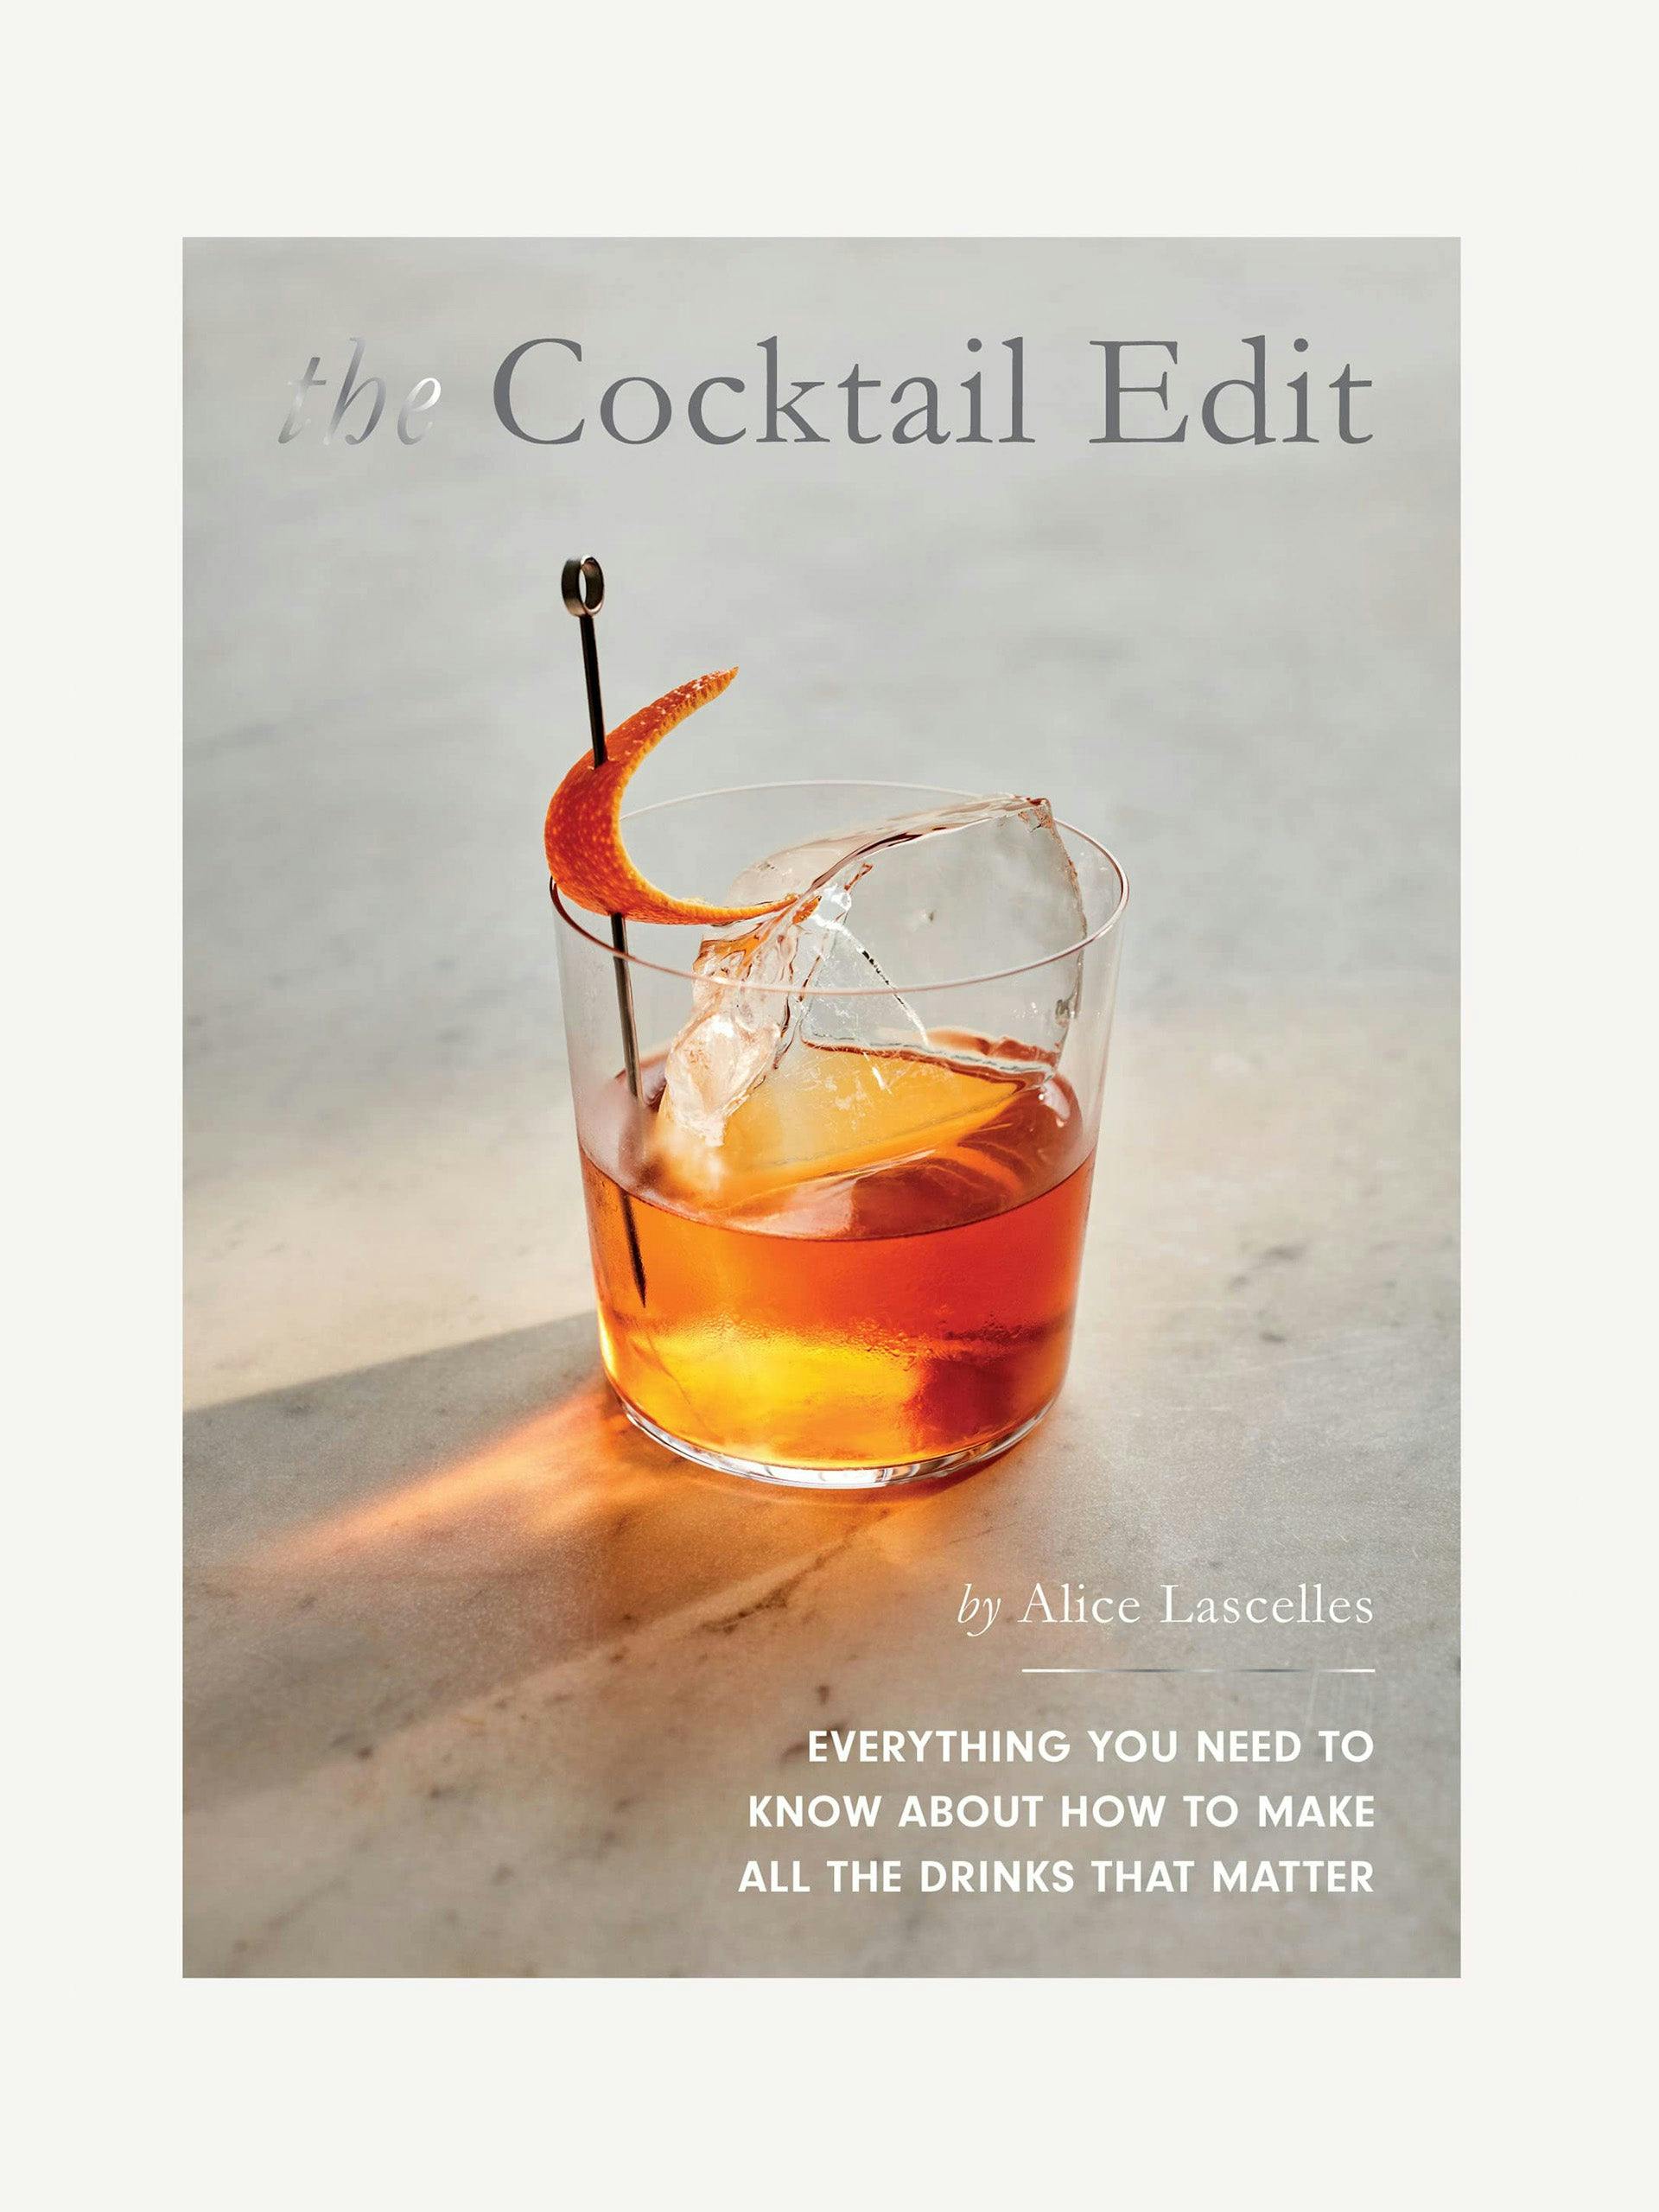 The Cocktail Edit book